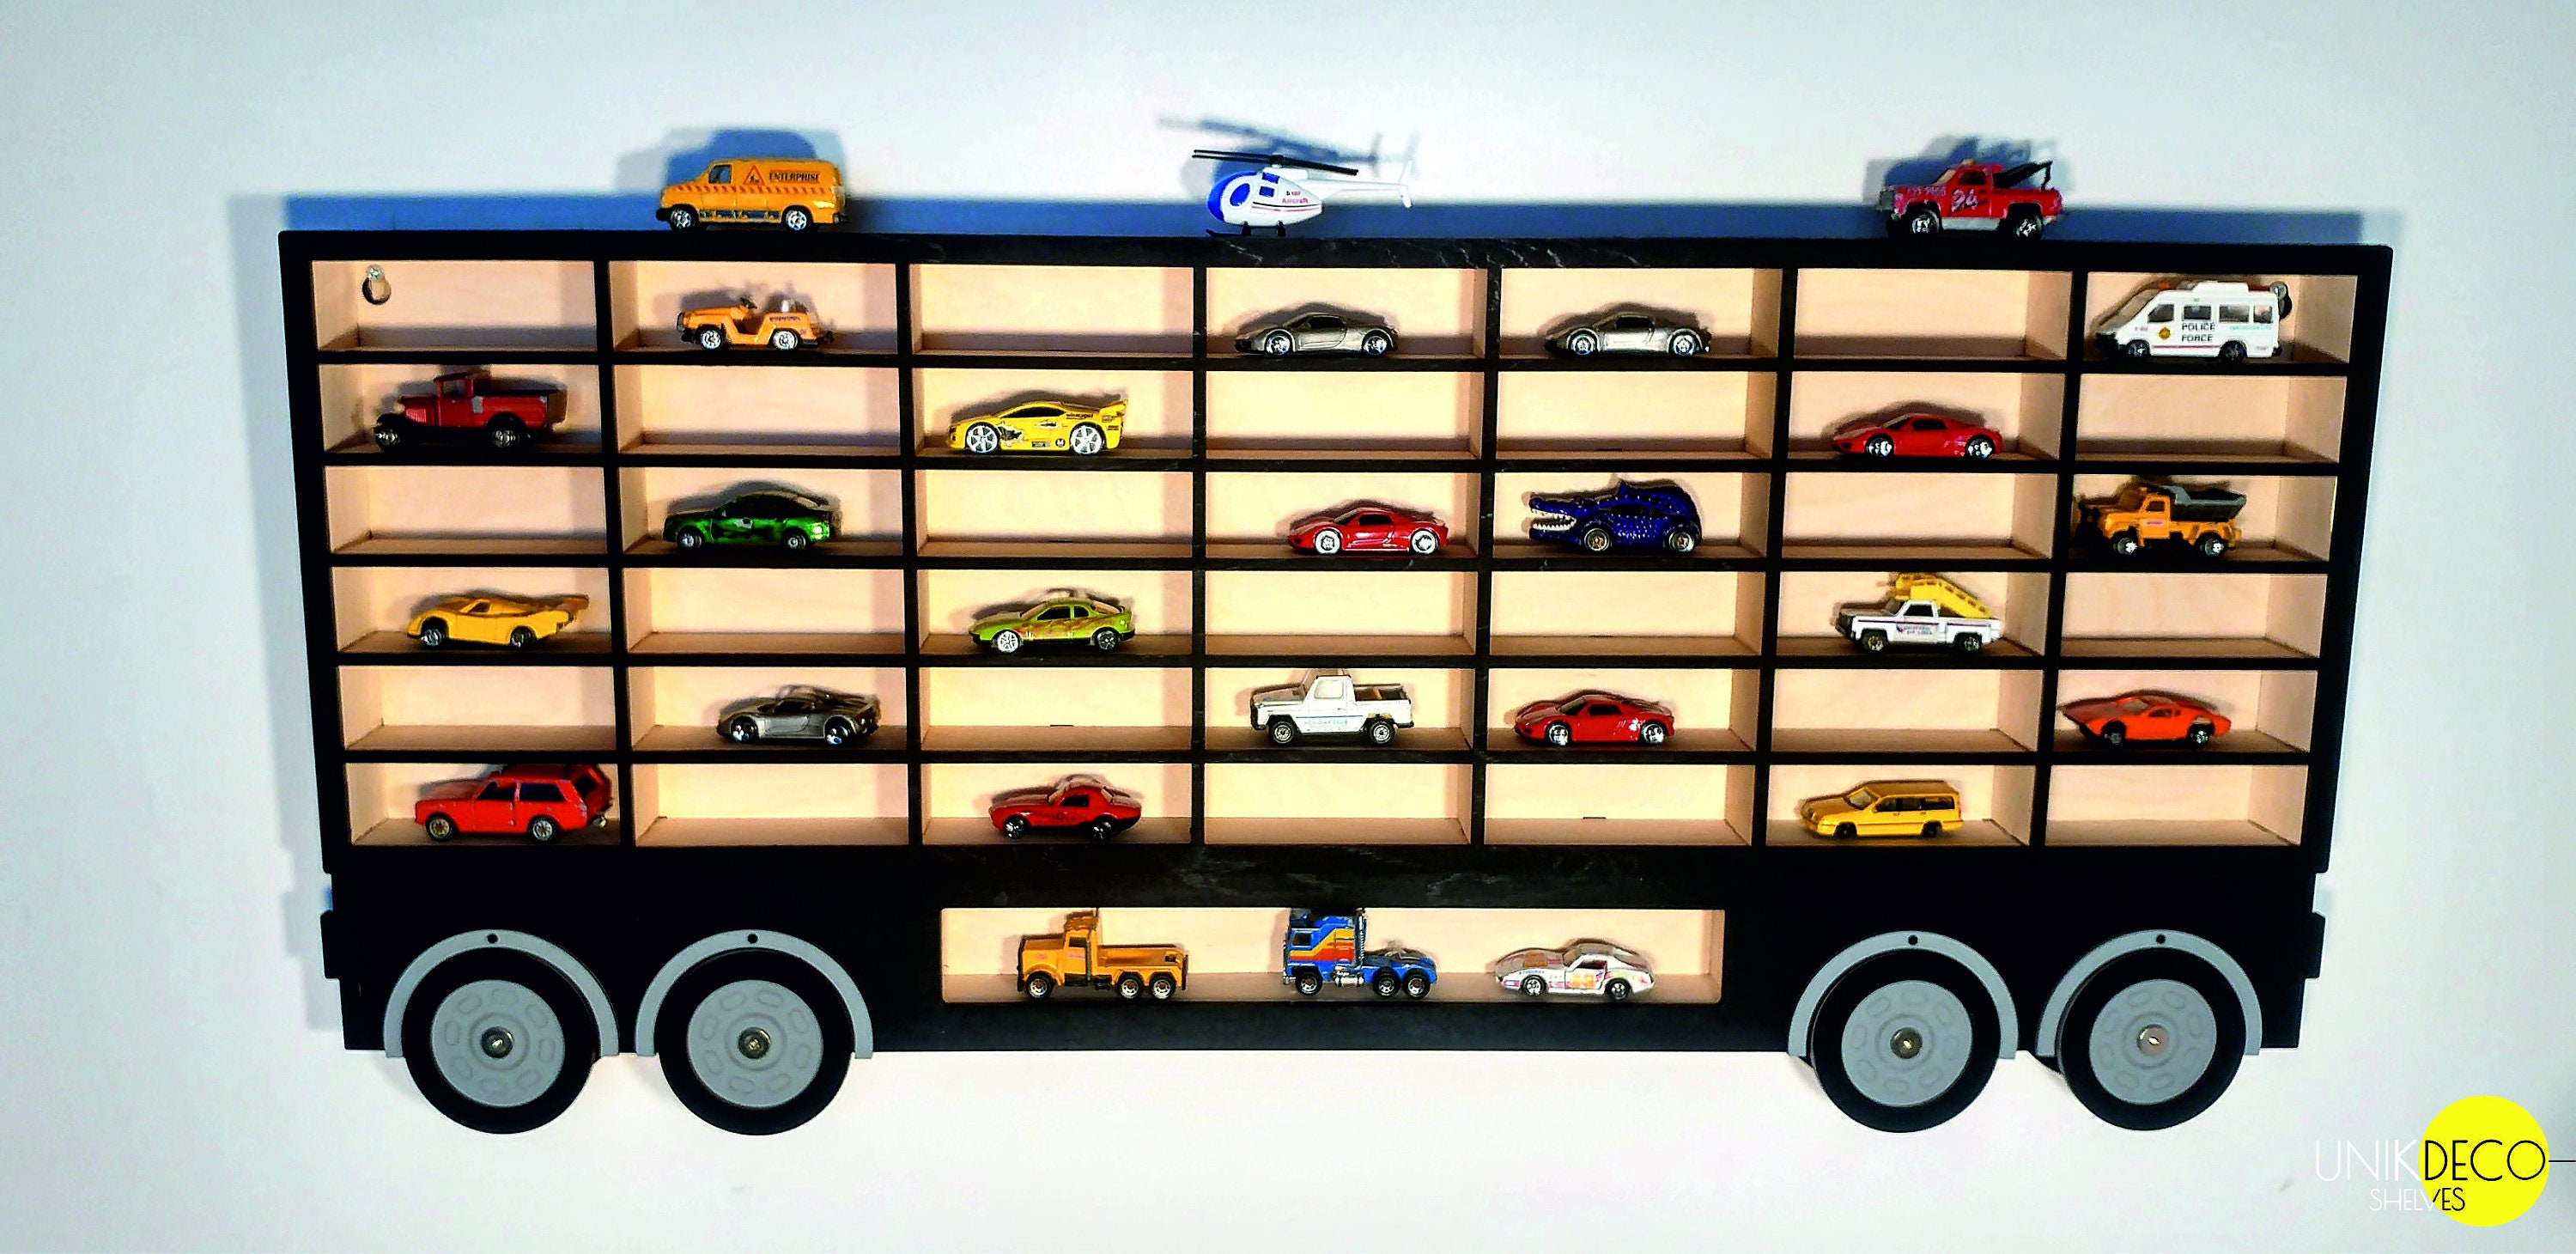 Hot Wheels Storage Box with 48 cars for Sale in Torrance, CA - OfferUp